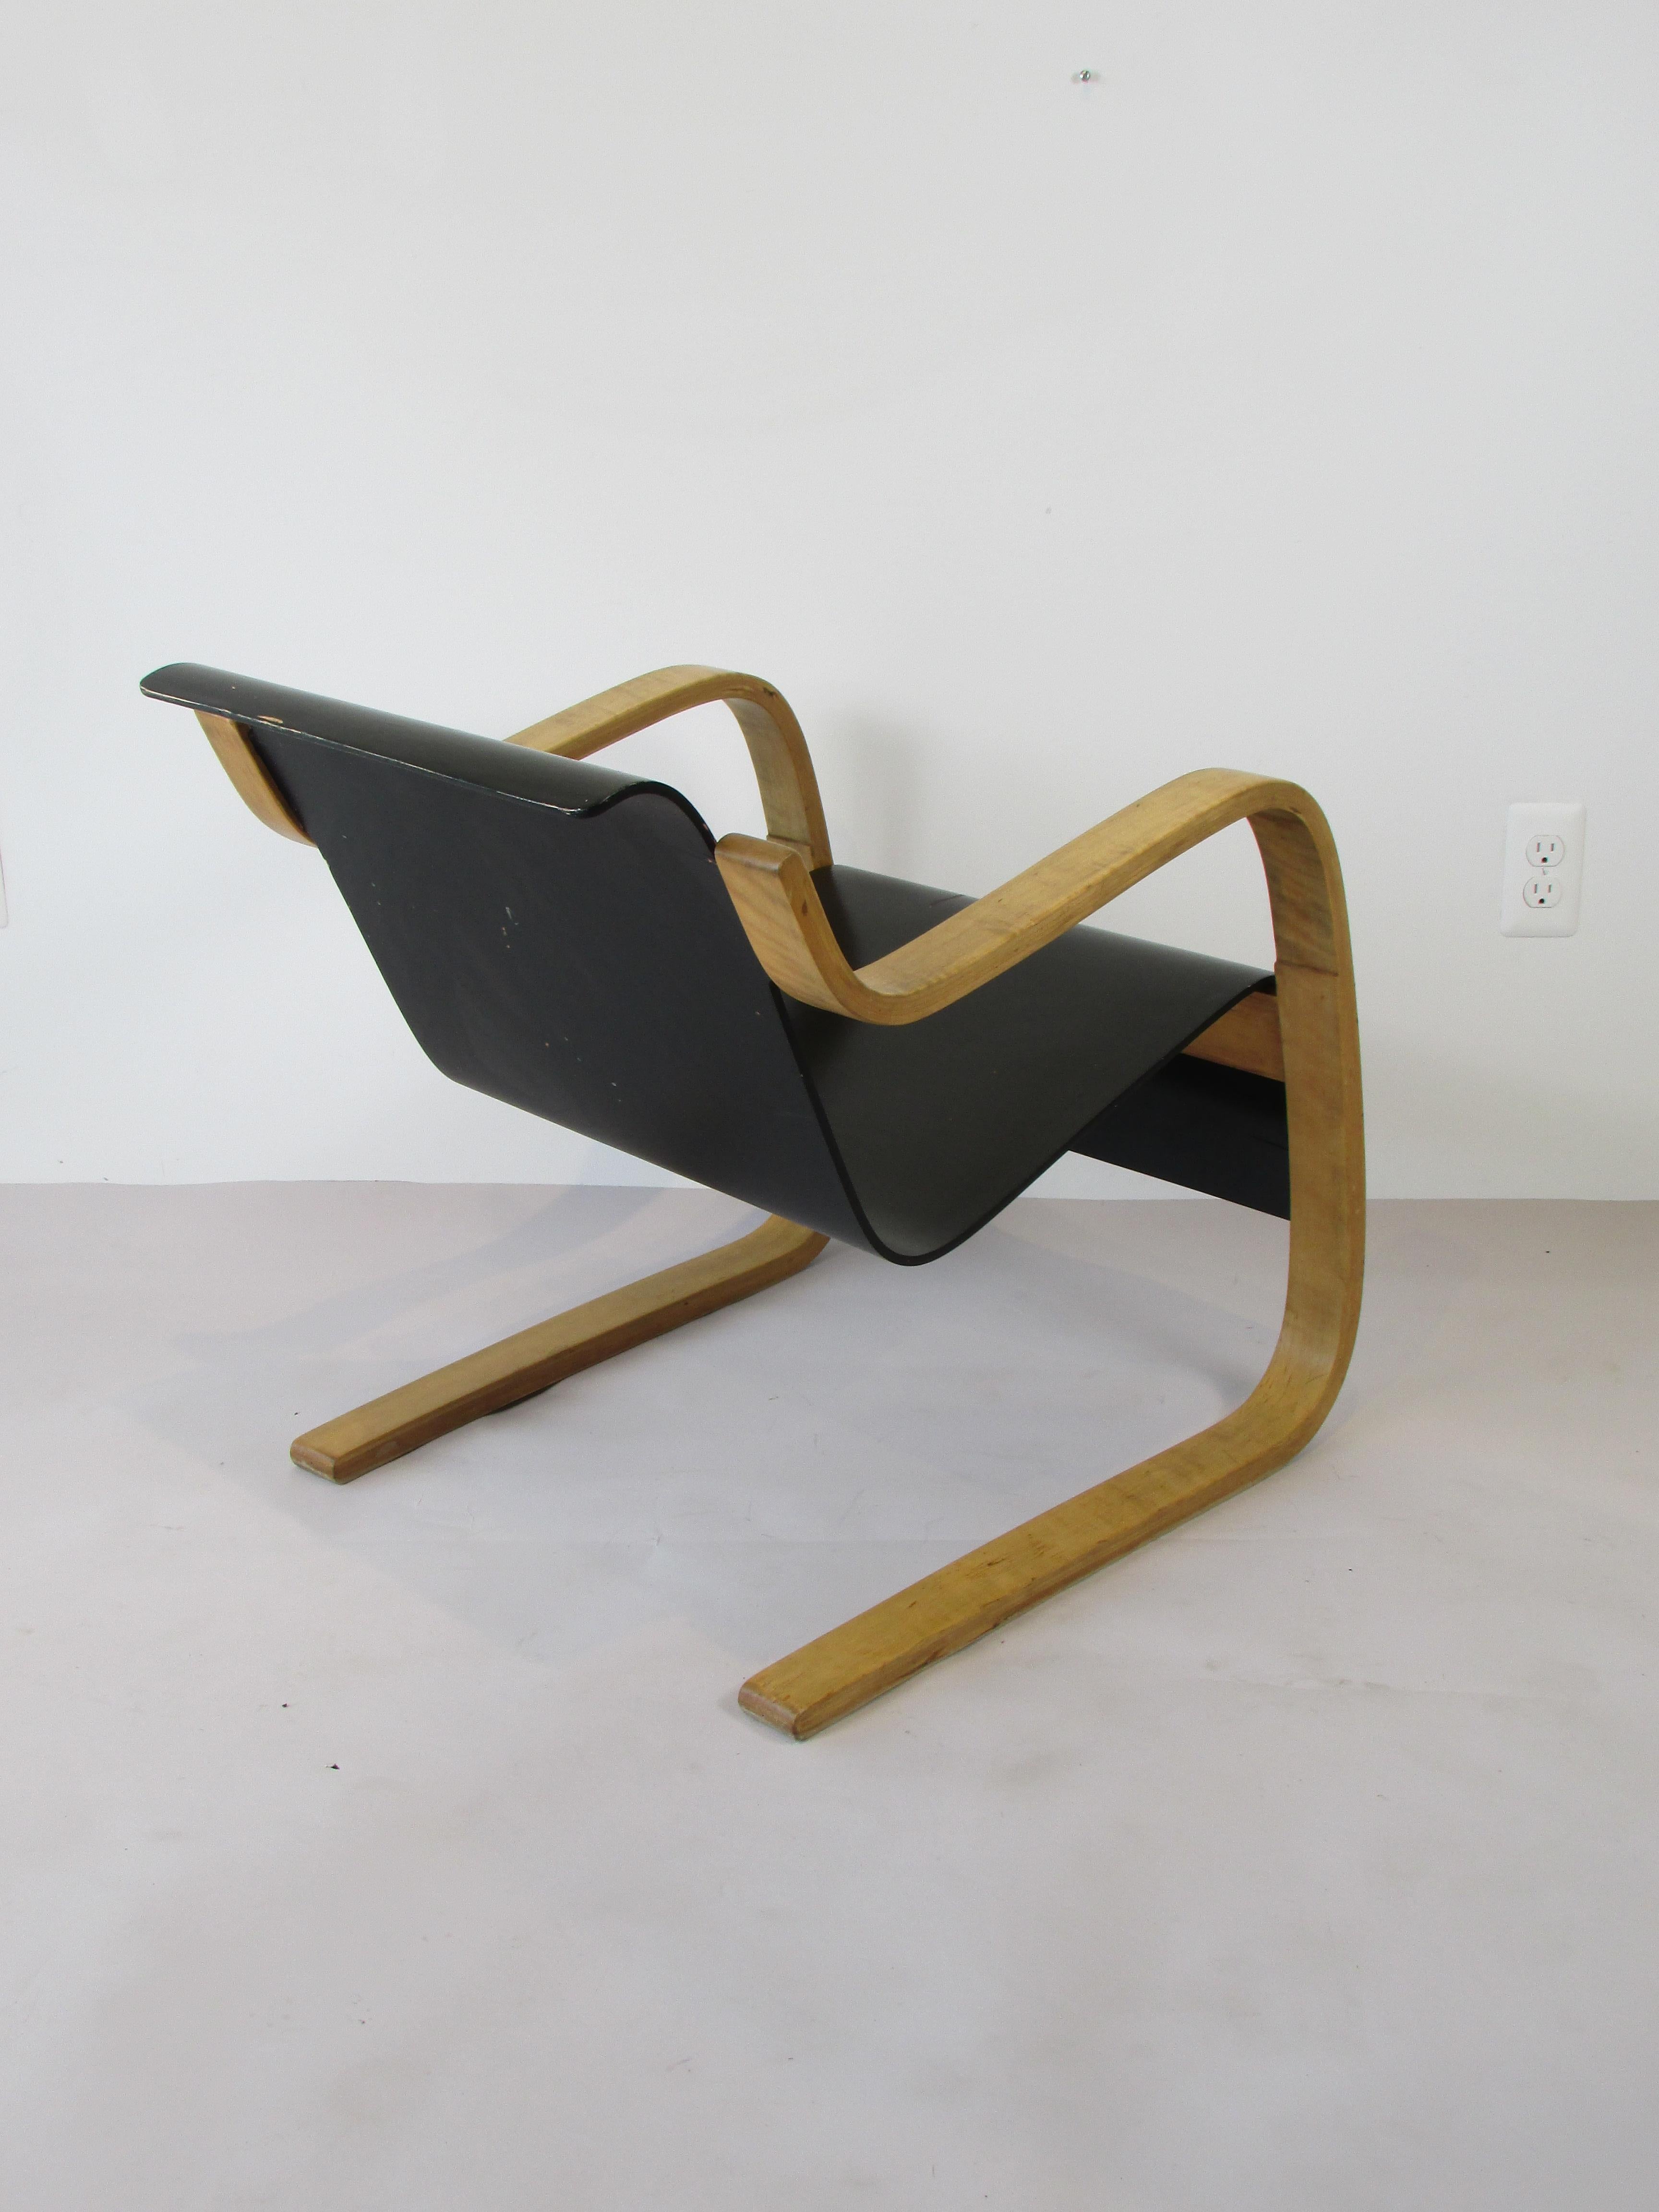 Finnish Alvar Aalto Model 31 Cantilevered Lounge Chair For Sale